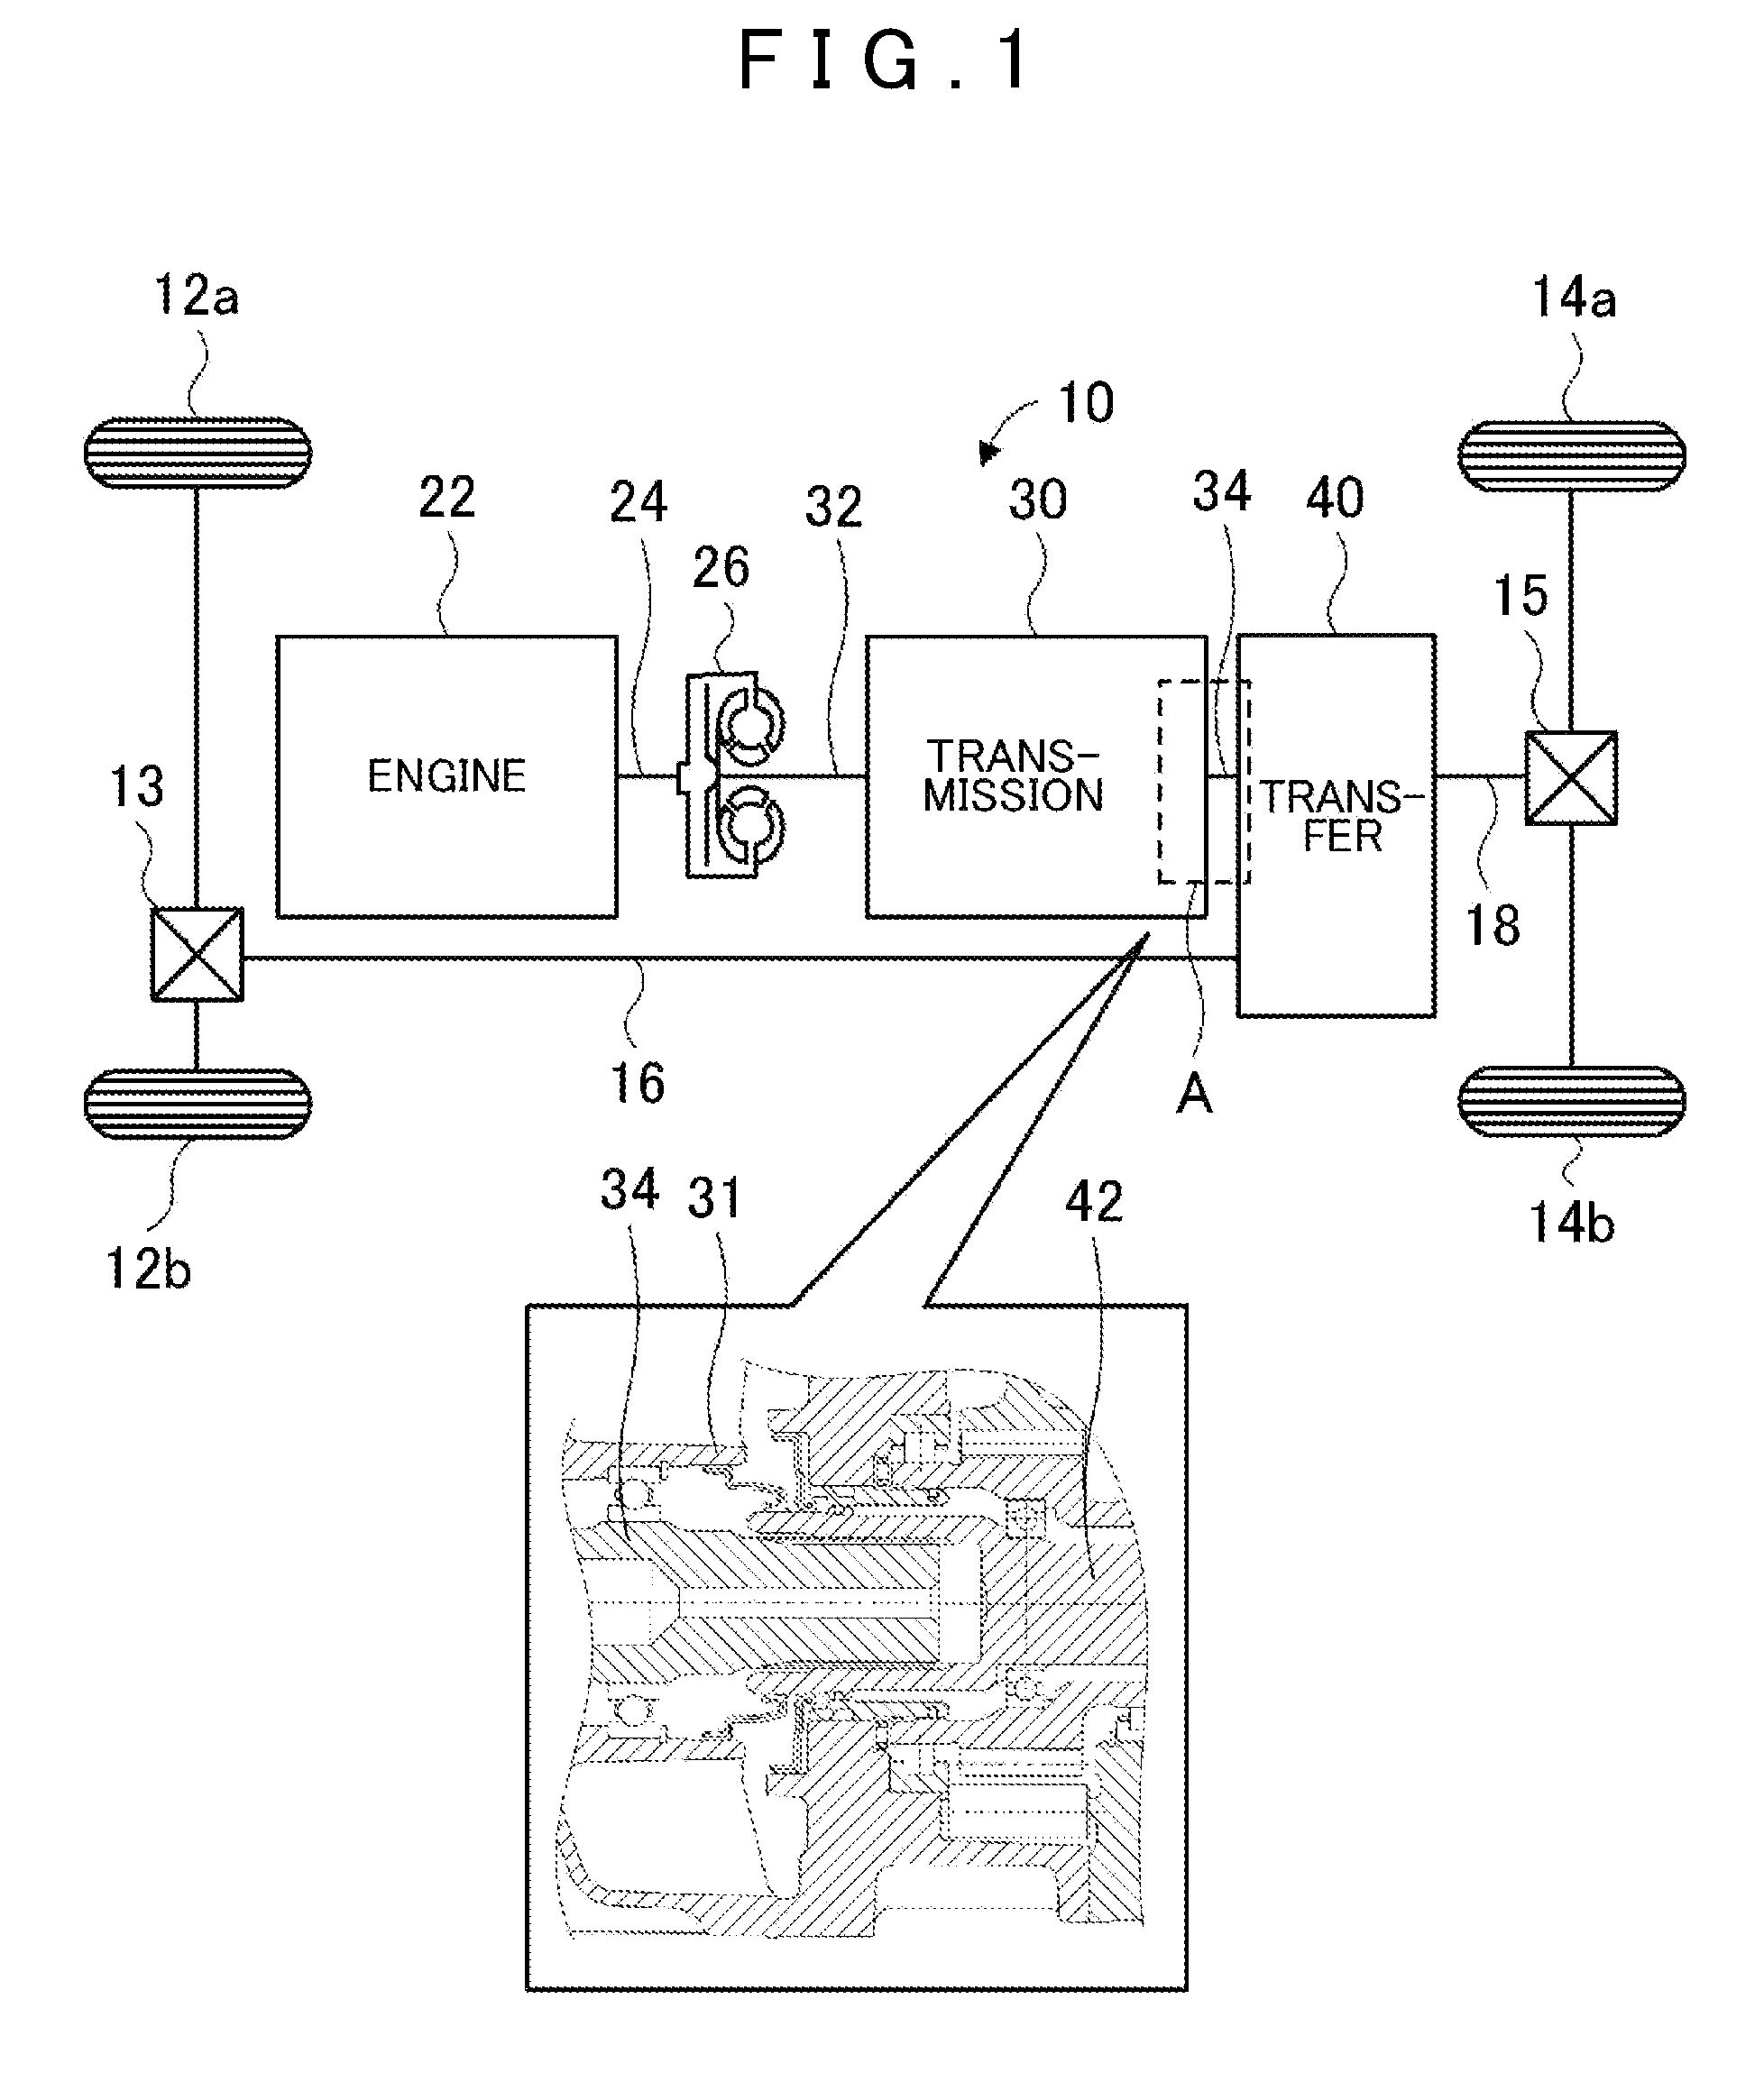 Oil seal and power transmission apparatus